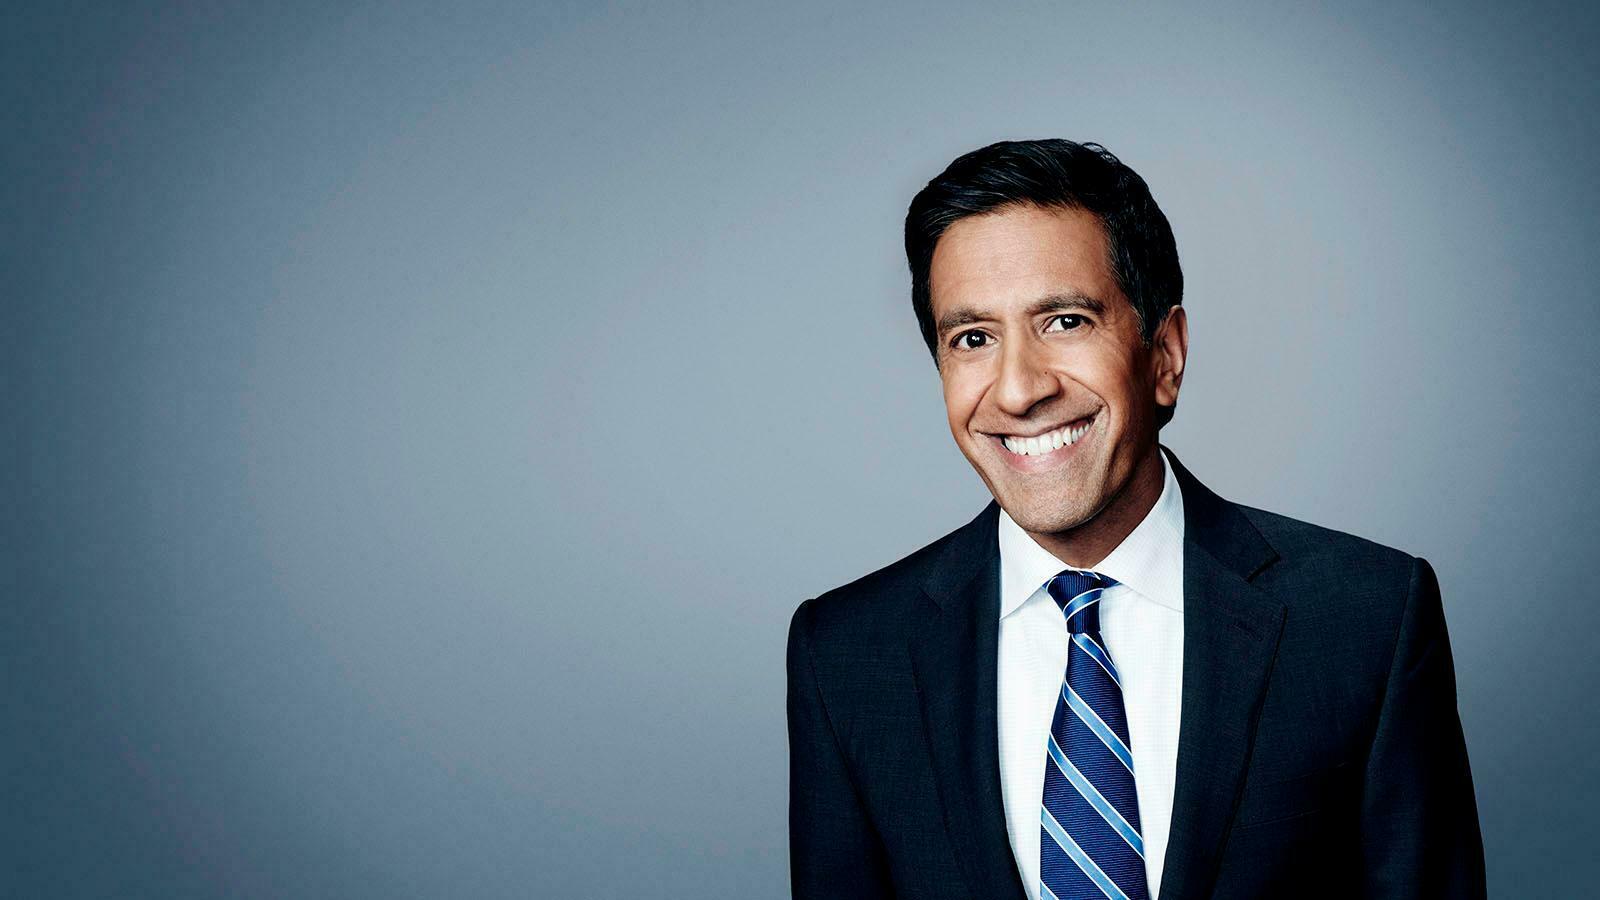 Featured image for “Weed 5: The CBD Craze Sanjay Gupta Full Documentary 2019”